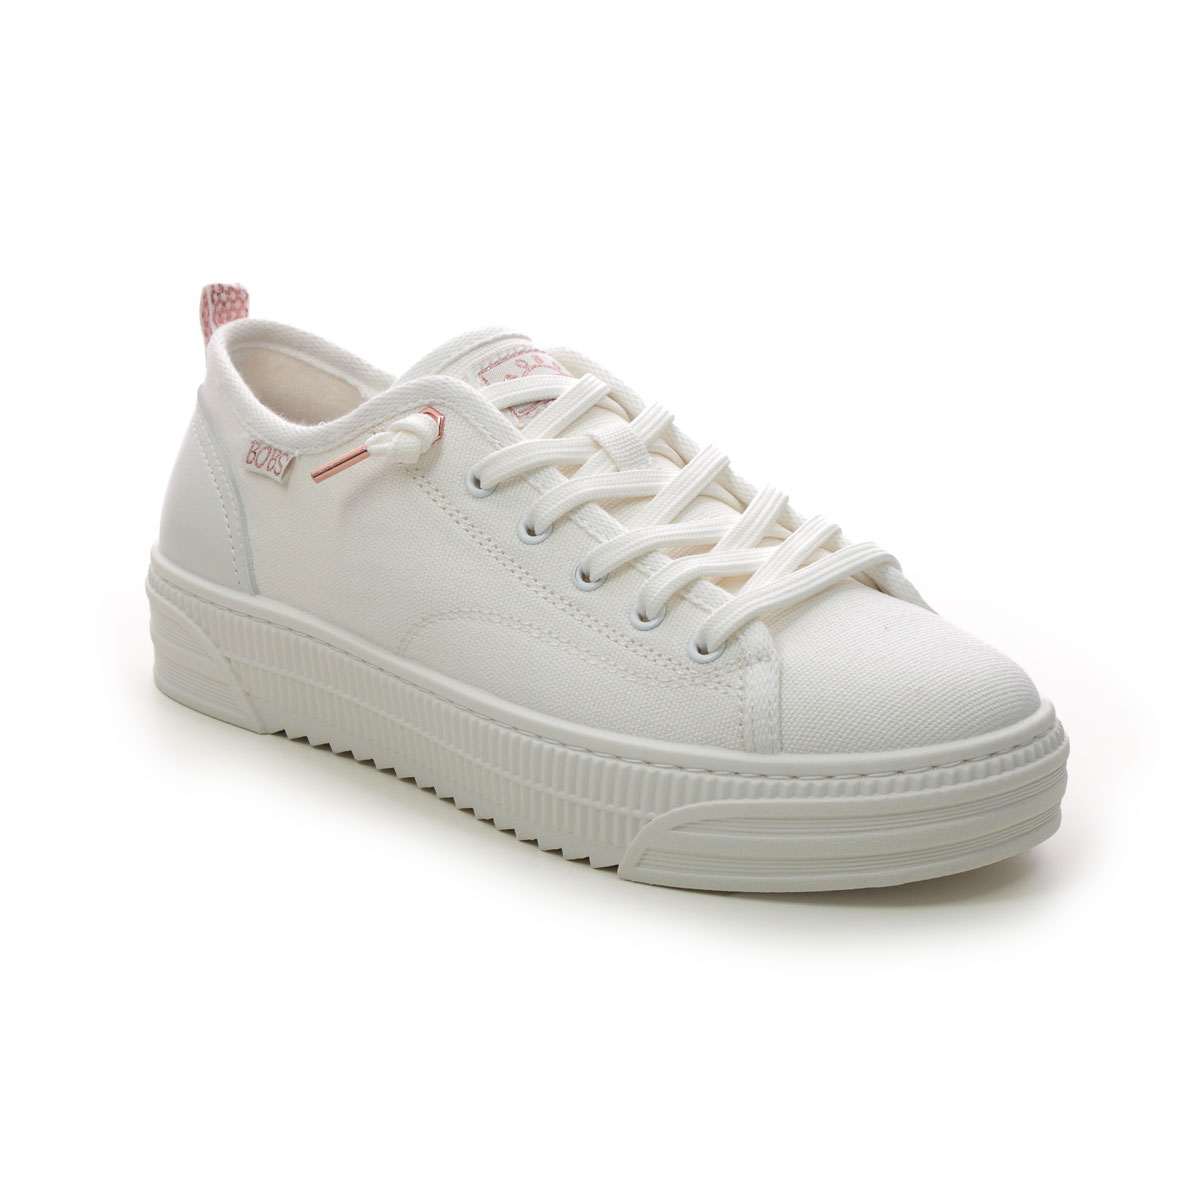 Skechers Bobs Copa OFWT Off White Womens trainers 114640 in a Plain Textile in Size 8